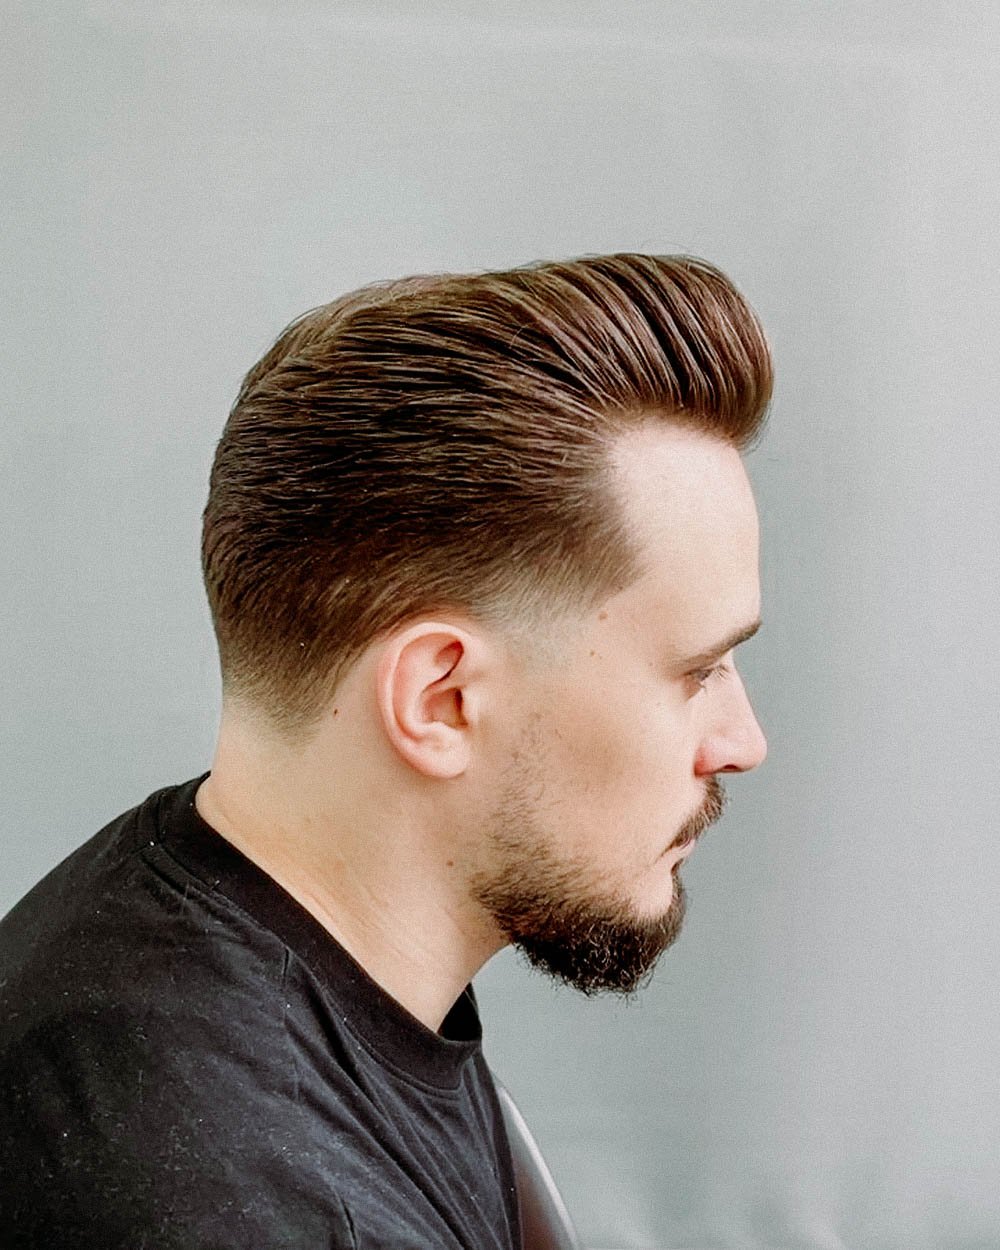 Short Back And Sides Hairstyle For Men - FashionBuzzer.com